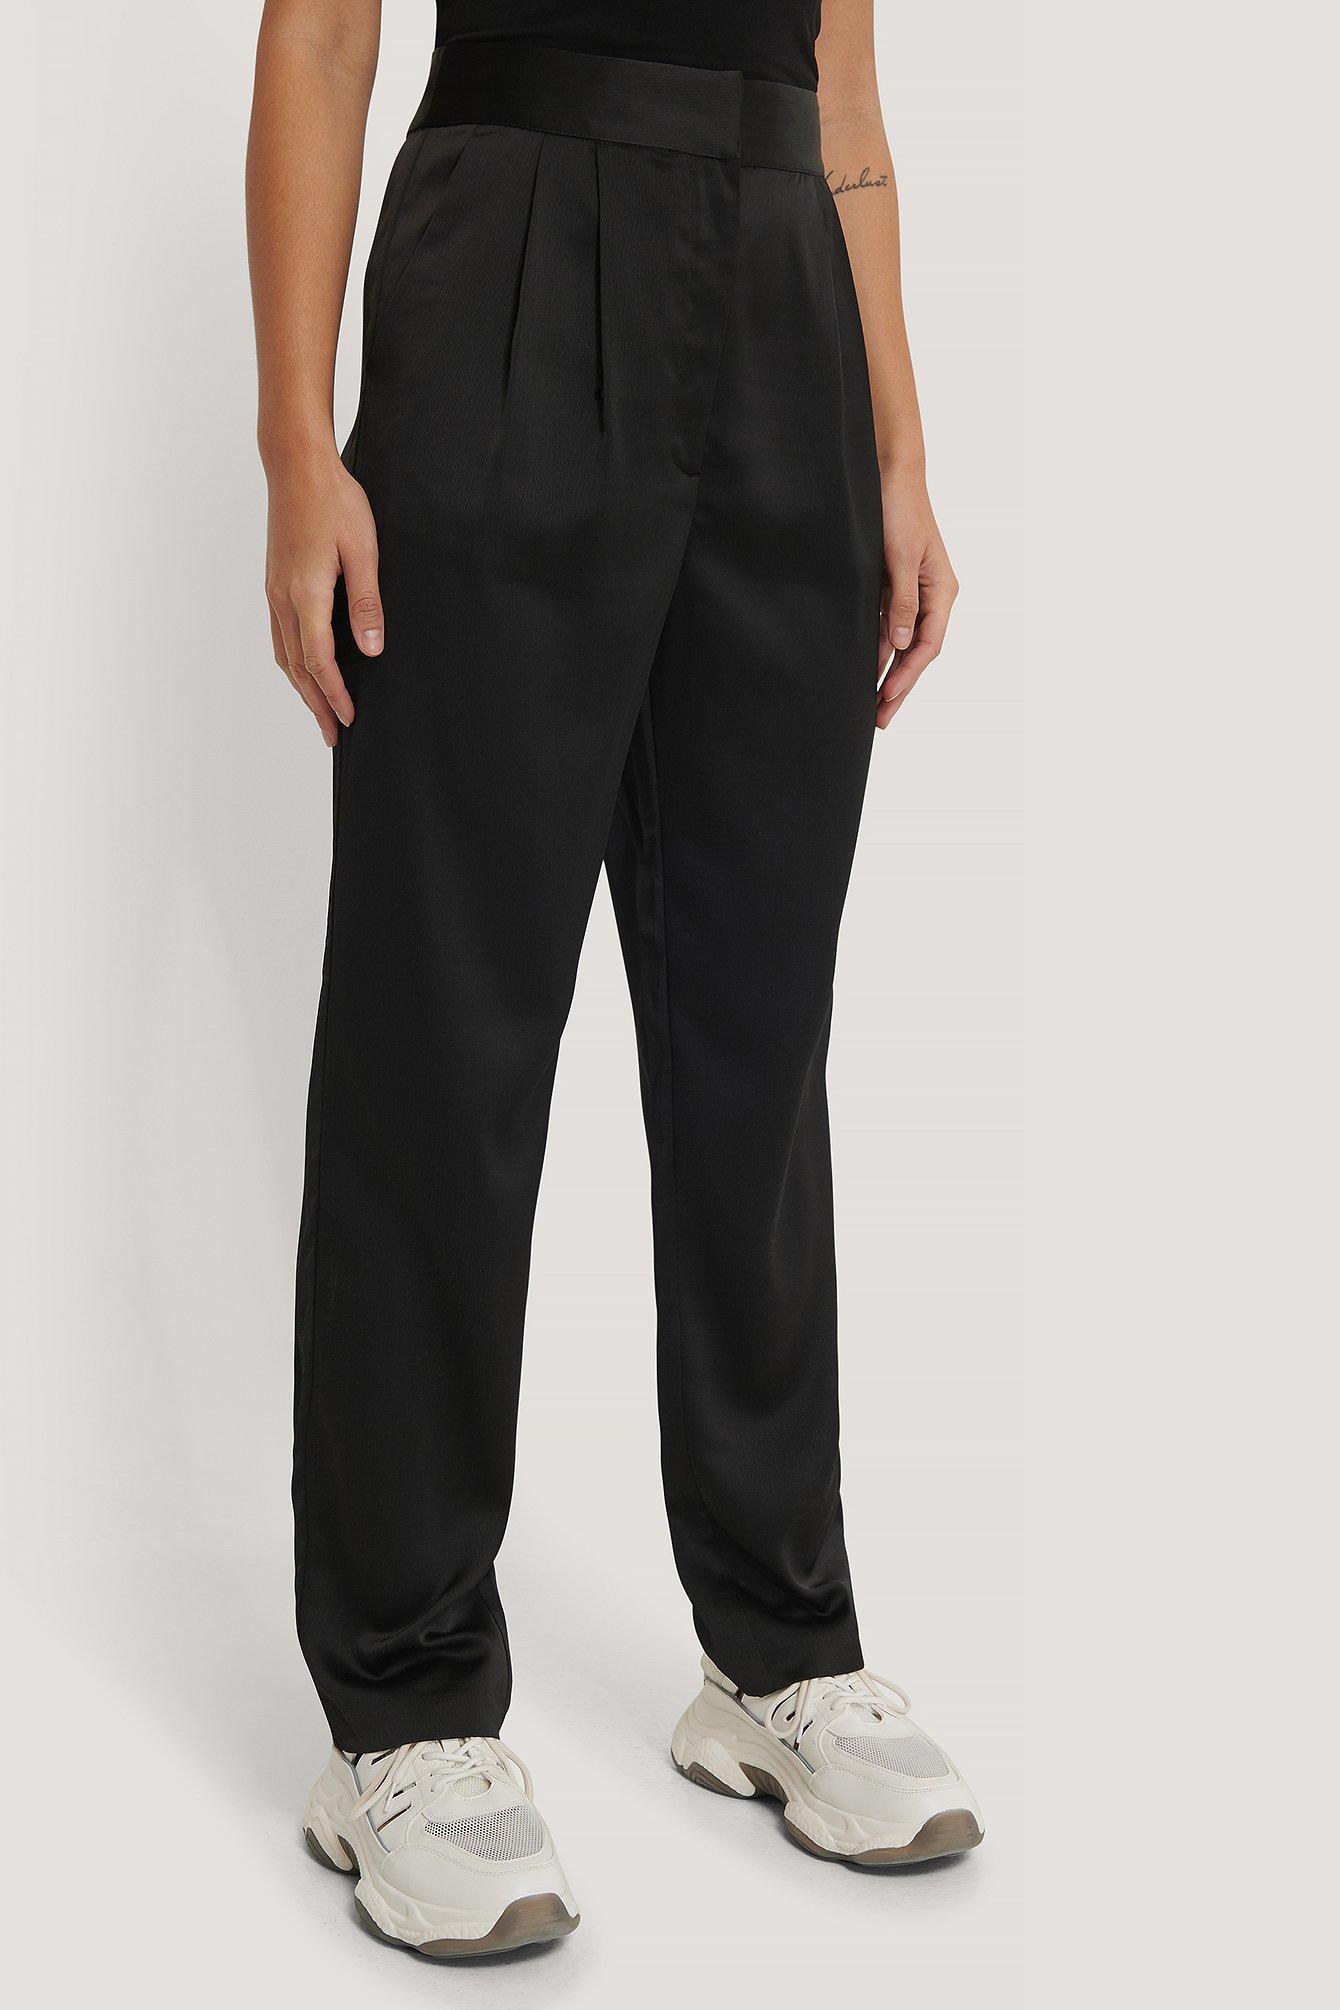 NA-KD Synthetic Black Shiny Tapered Pants - Lyst